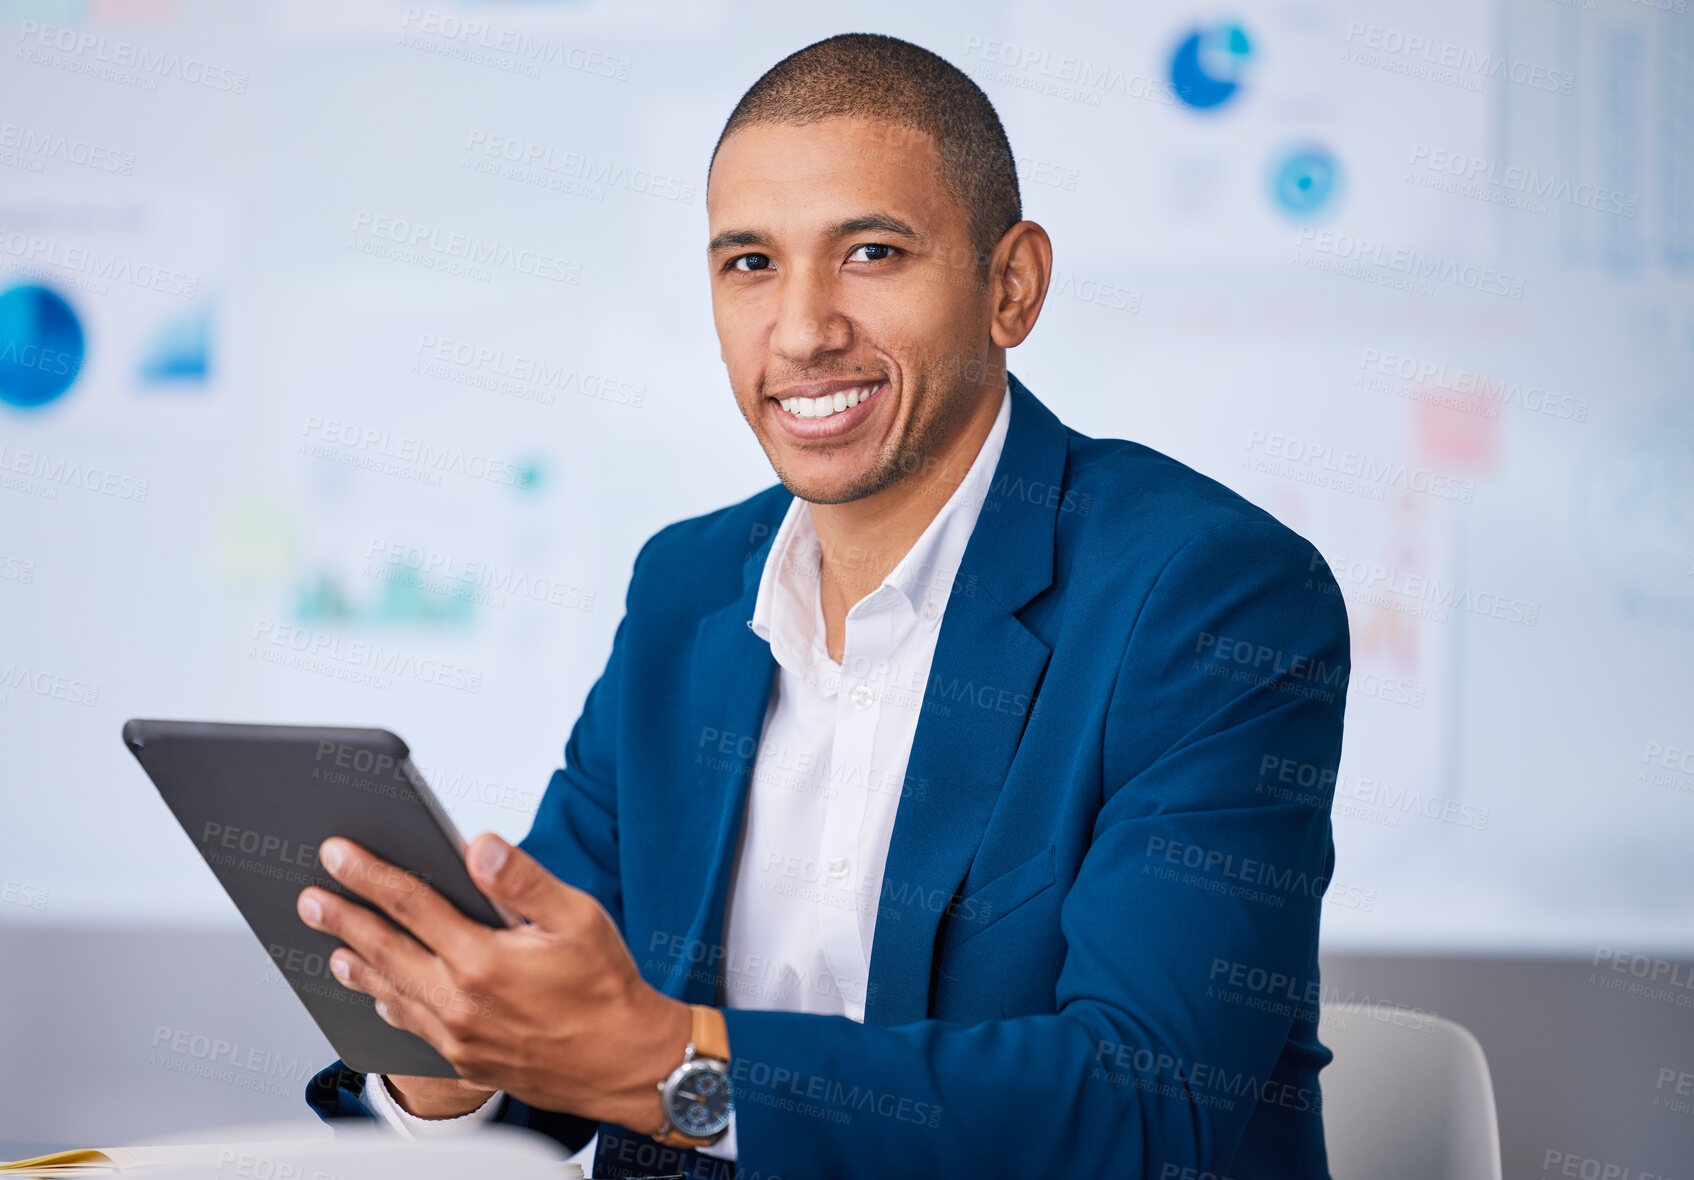 Buy stock photo Successful financial businessman smiling while browsing on a digital tablet in the office. Portrait of a male professional accountant feeling positive after completing a deal or finishing a work task